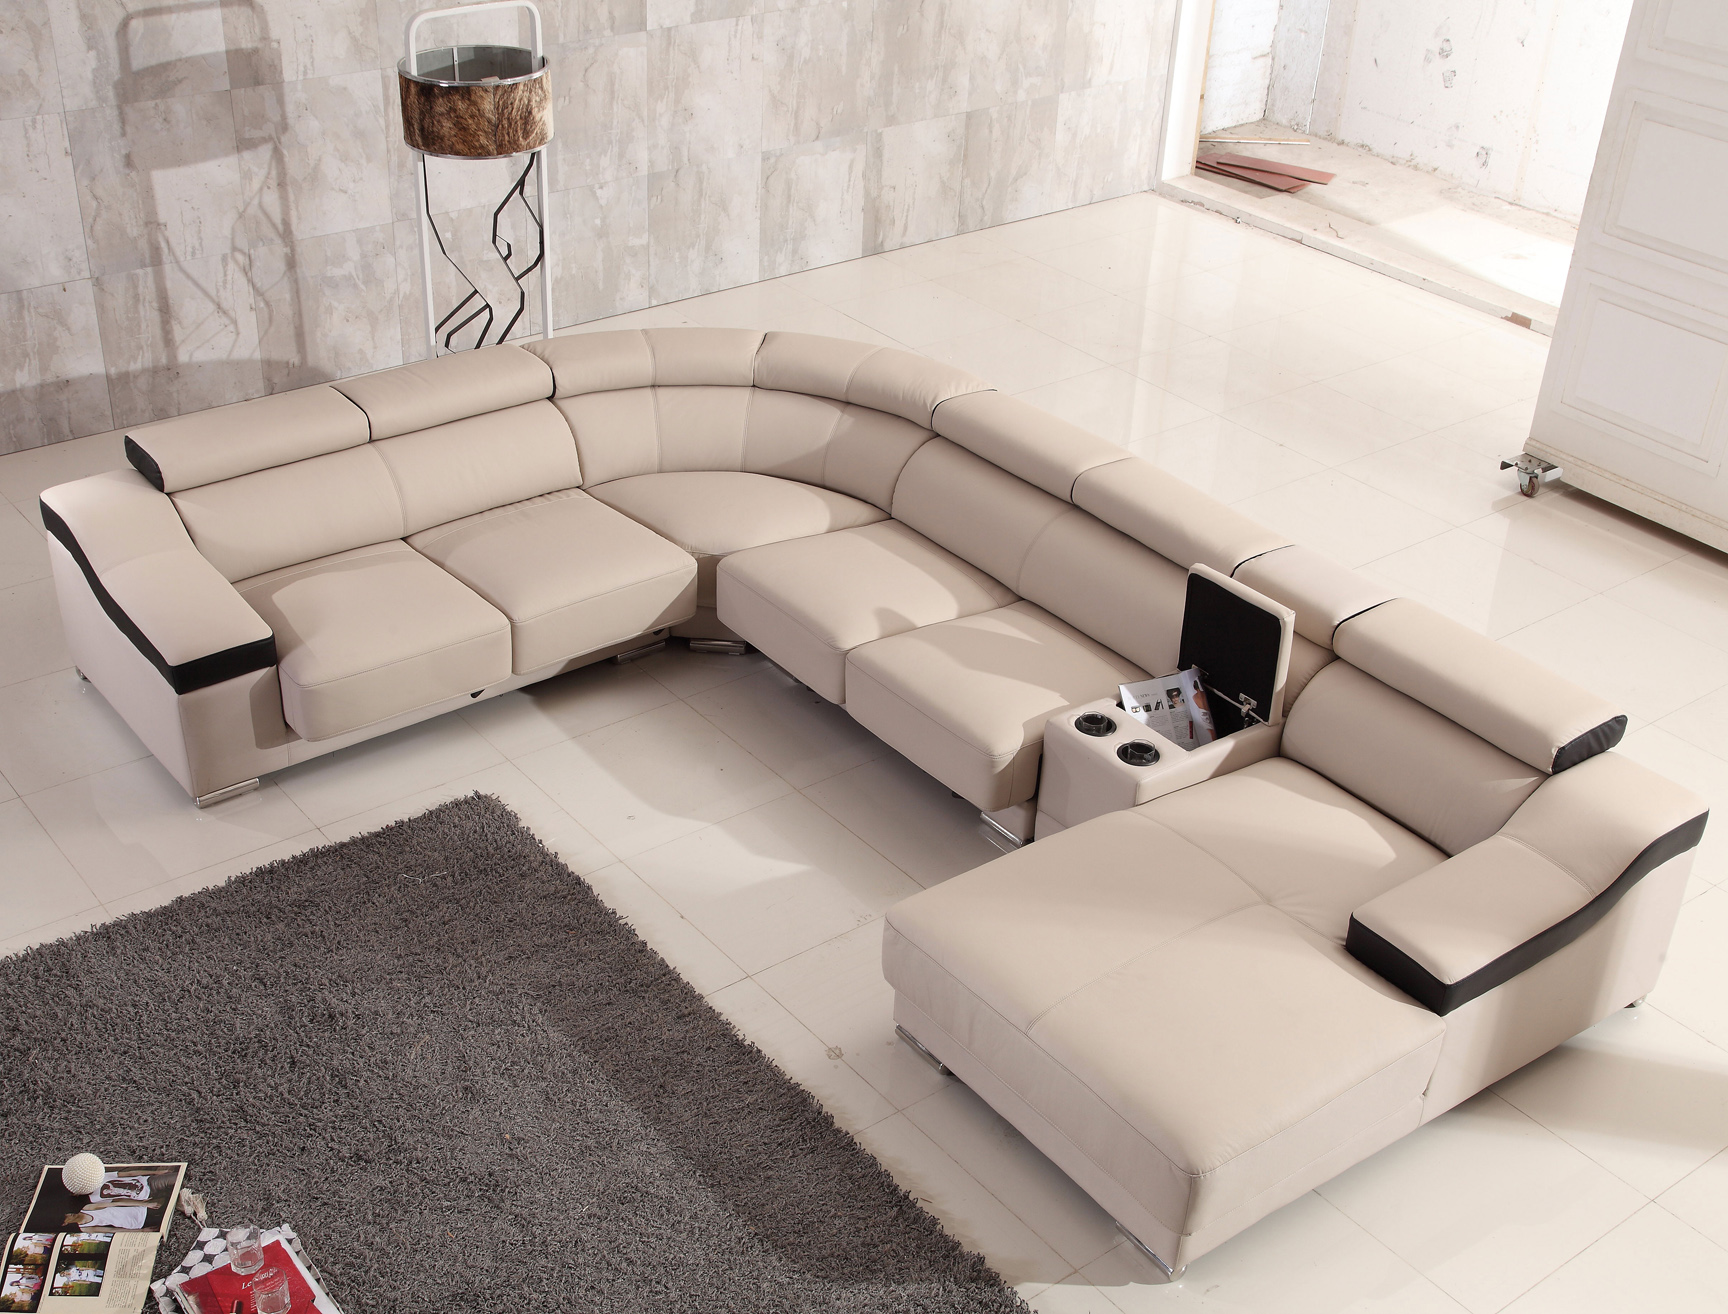 Living Room Furniture Sleepers Sofas Loveseats and Chairs 1369